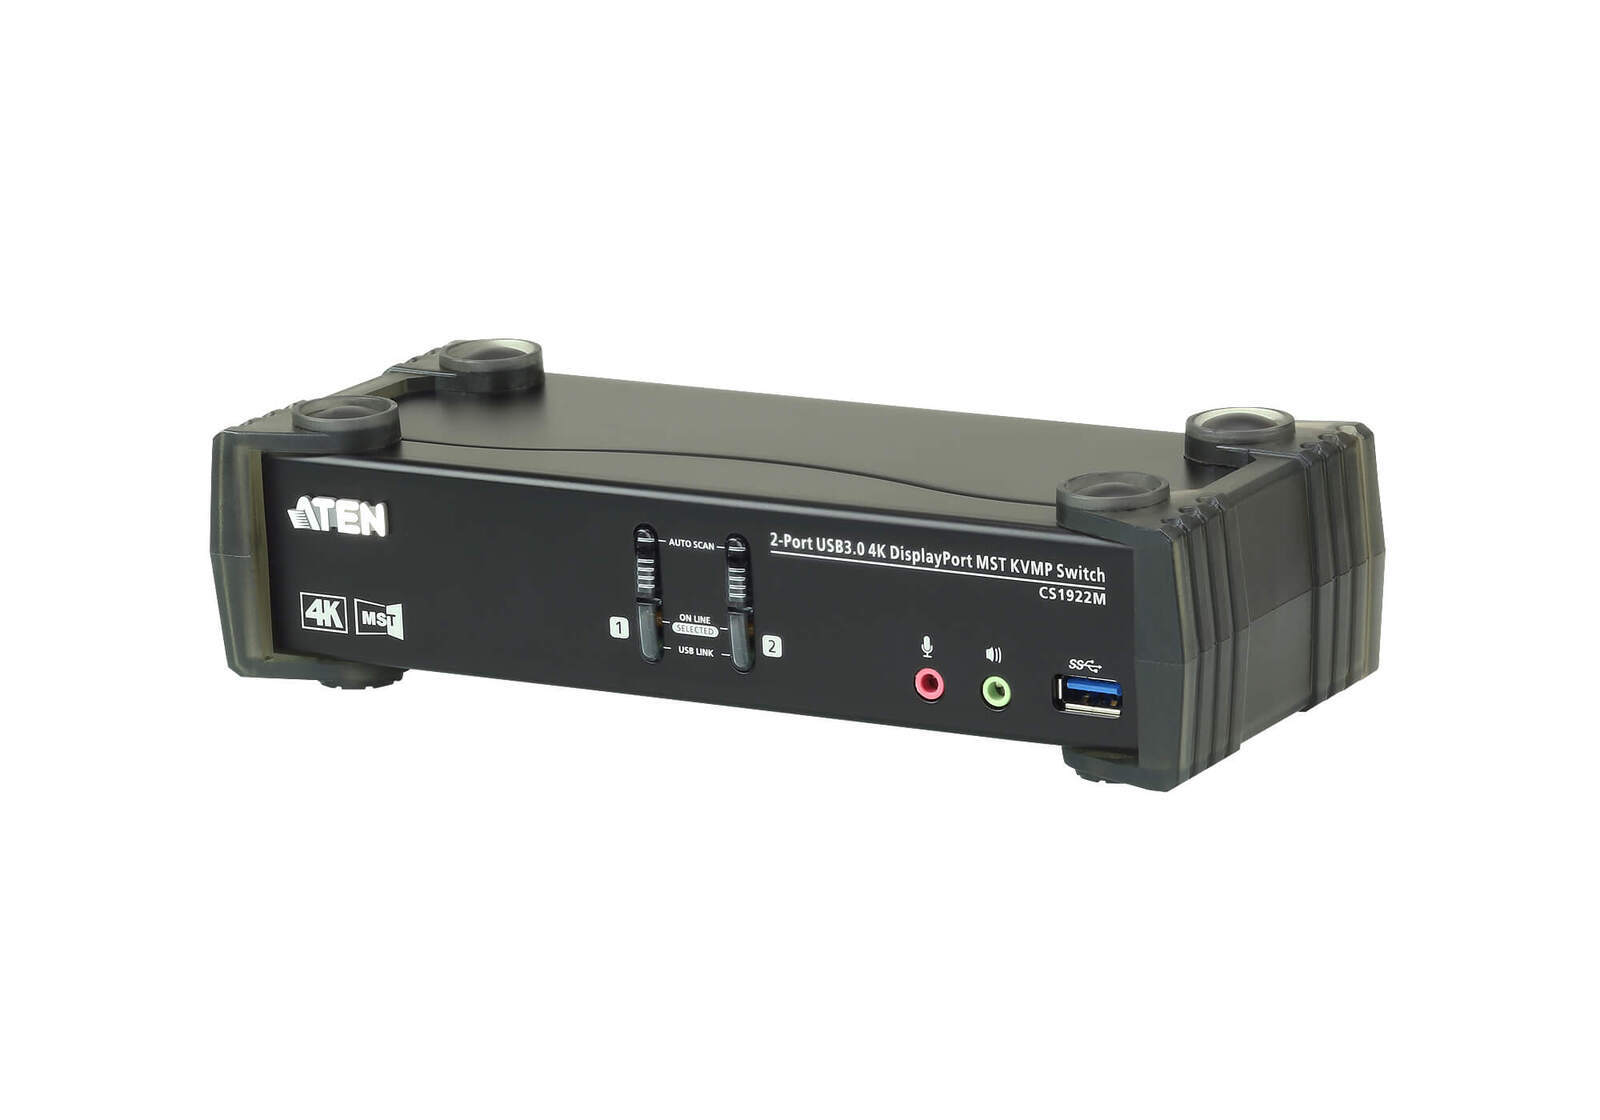 Aten Desktop KVMP Switch 2 Port Single to Dual Display 4k DisplayPort MST w/ audio, Cables Included, 2x USB Port, Selection Via Front Panel